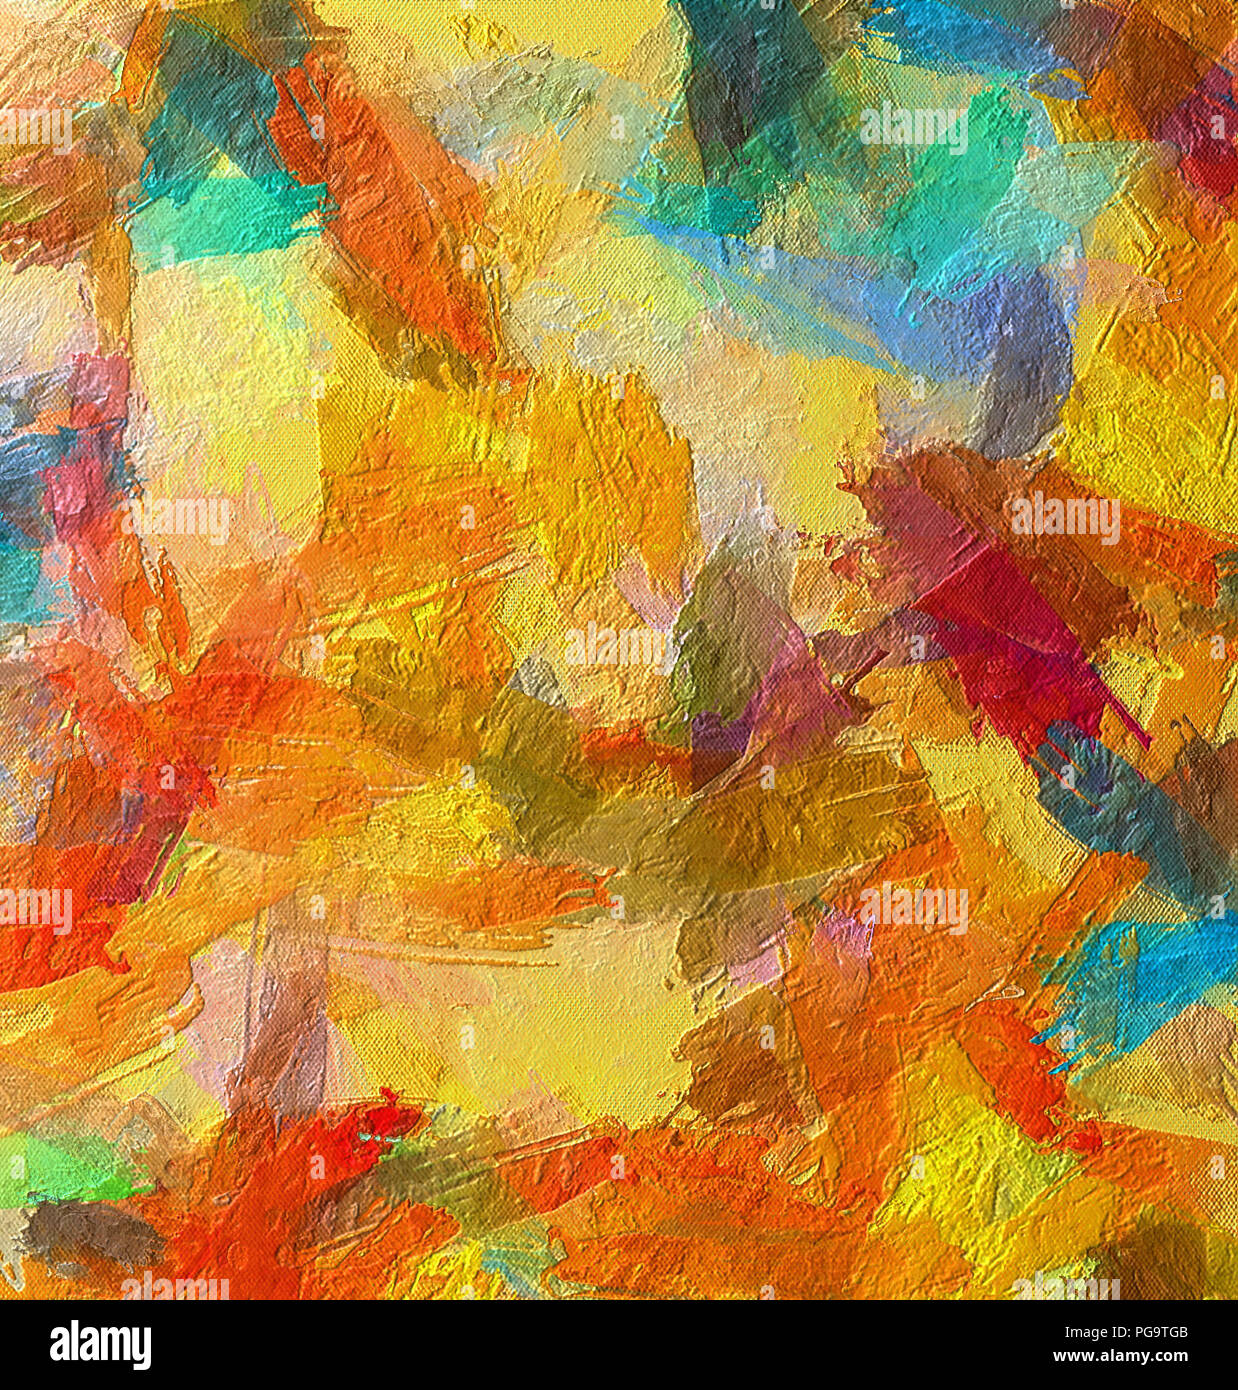 Abstract painting background. Big size oil painting modern wall art.  Chaotic brush strokes of paint on canvas. Impression bright colors.  Template Stock Photo - Alamy